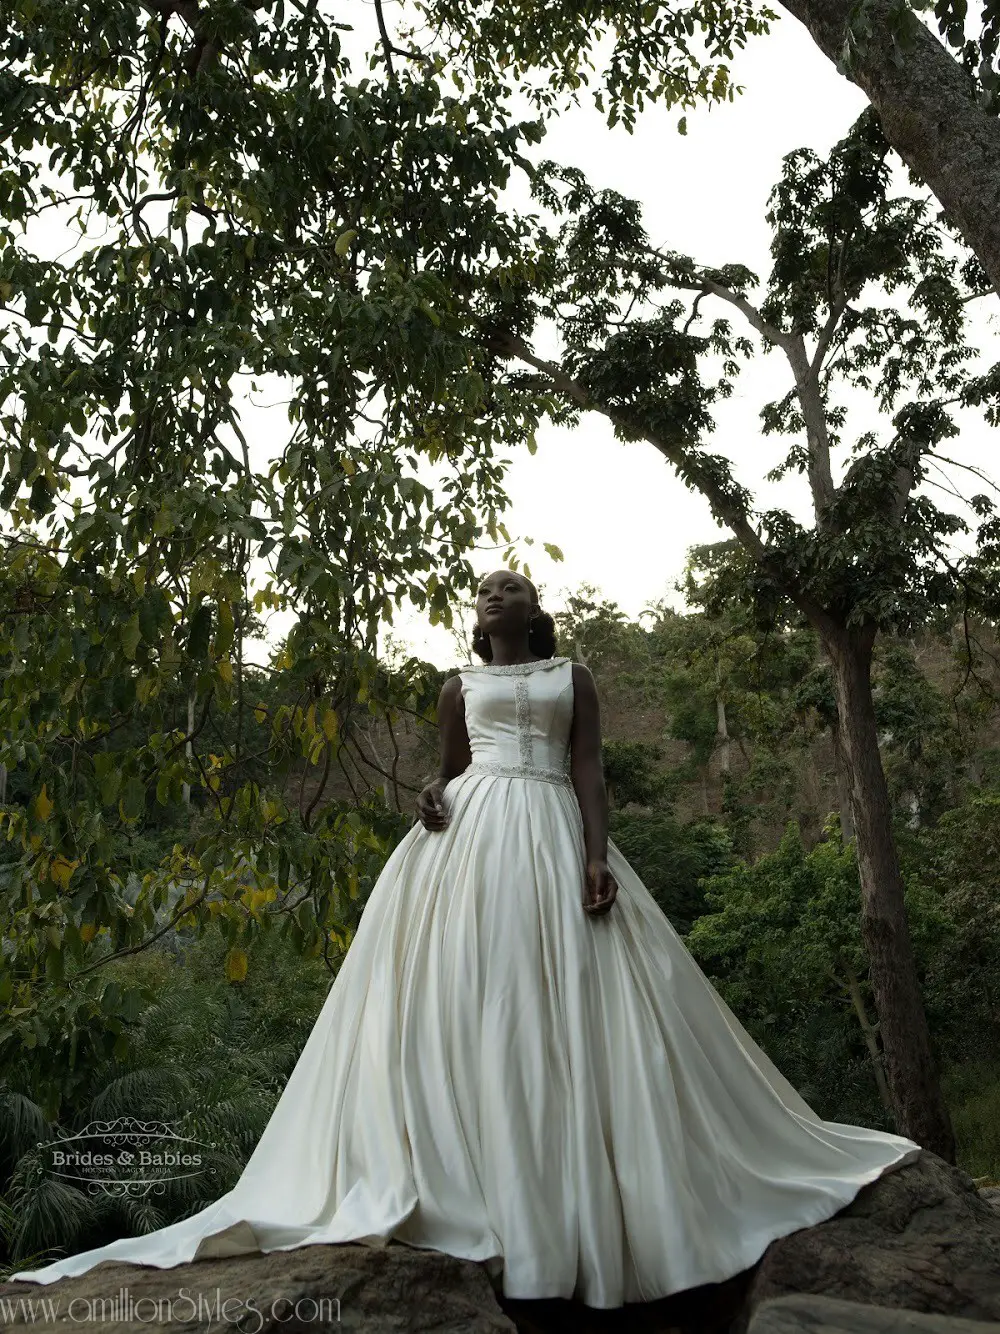 Brides & Babies Releases A Trendy And Classy Bridal Collection